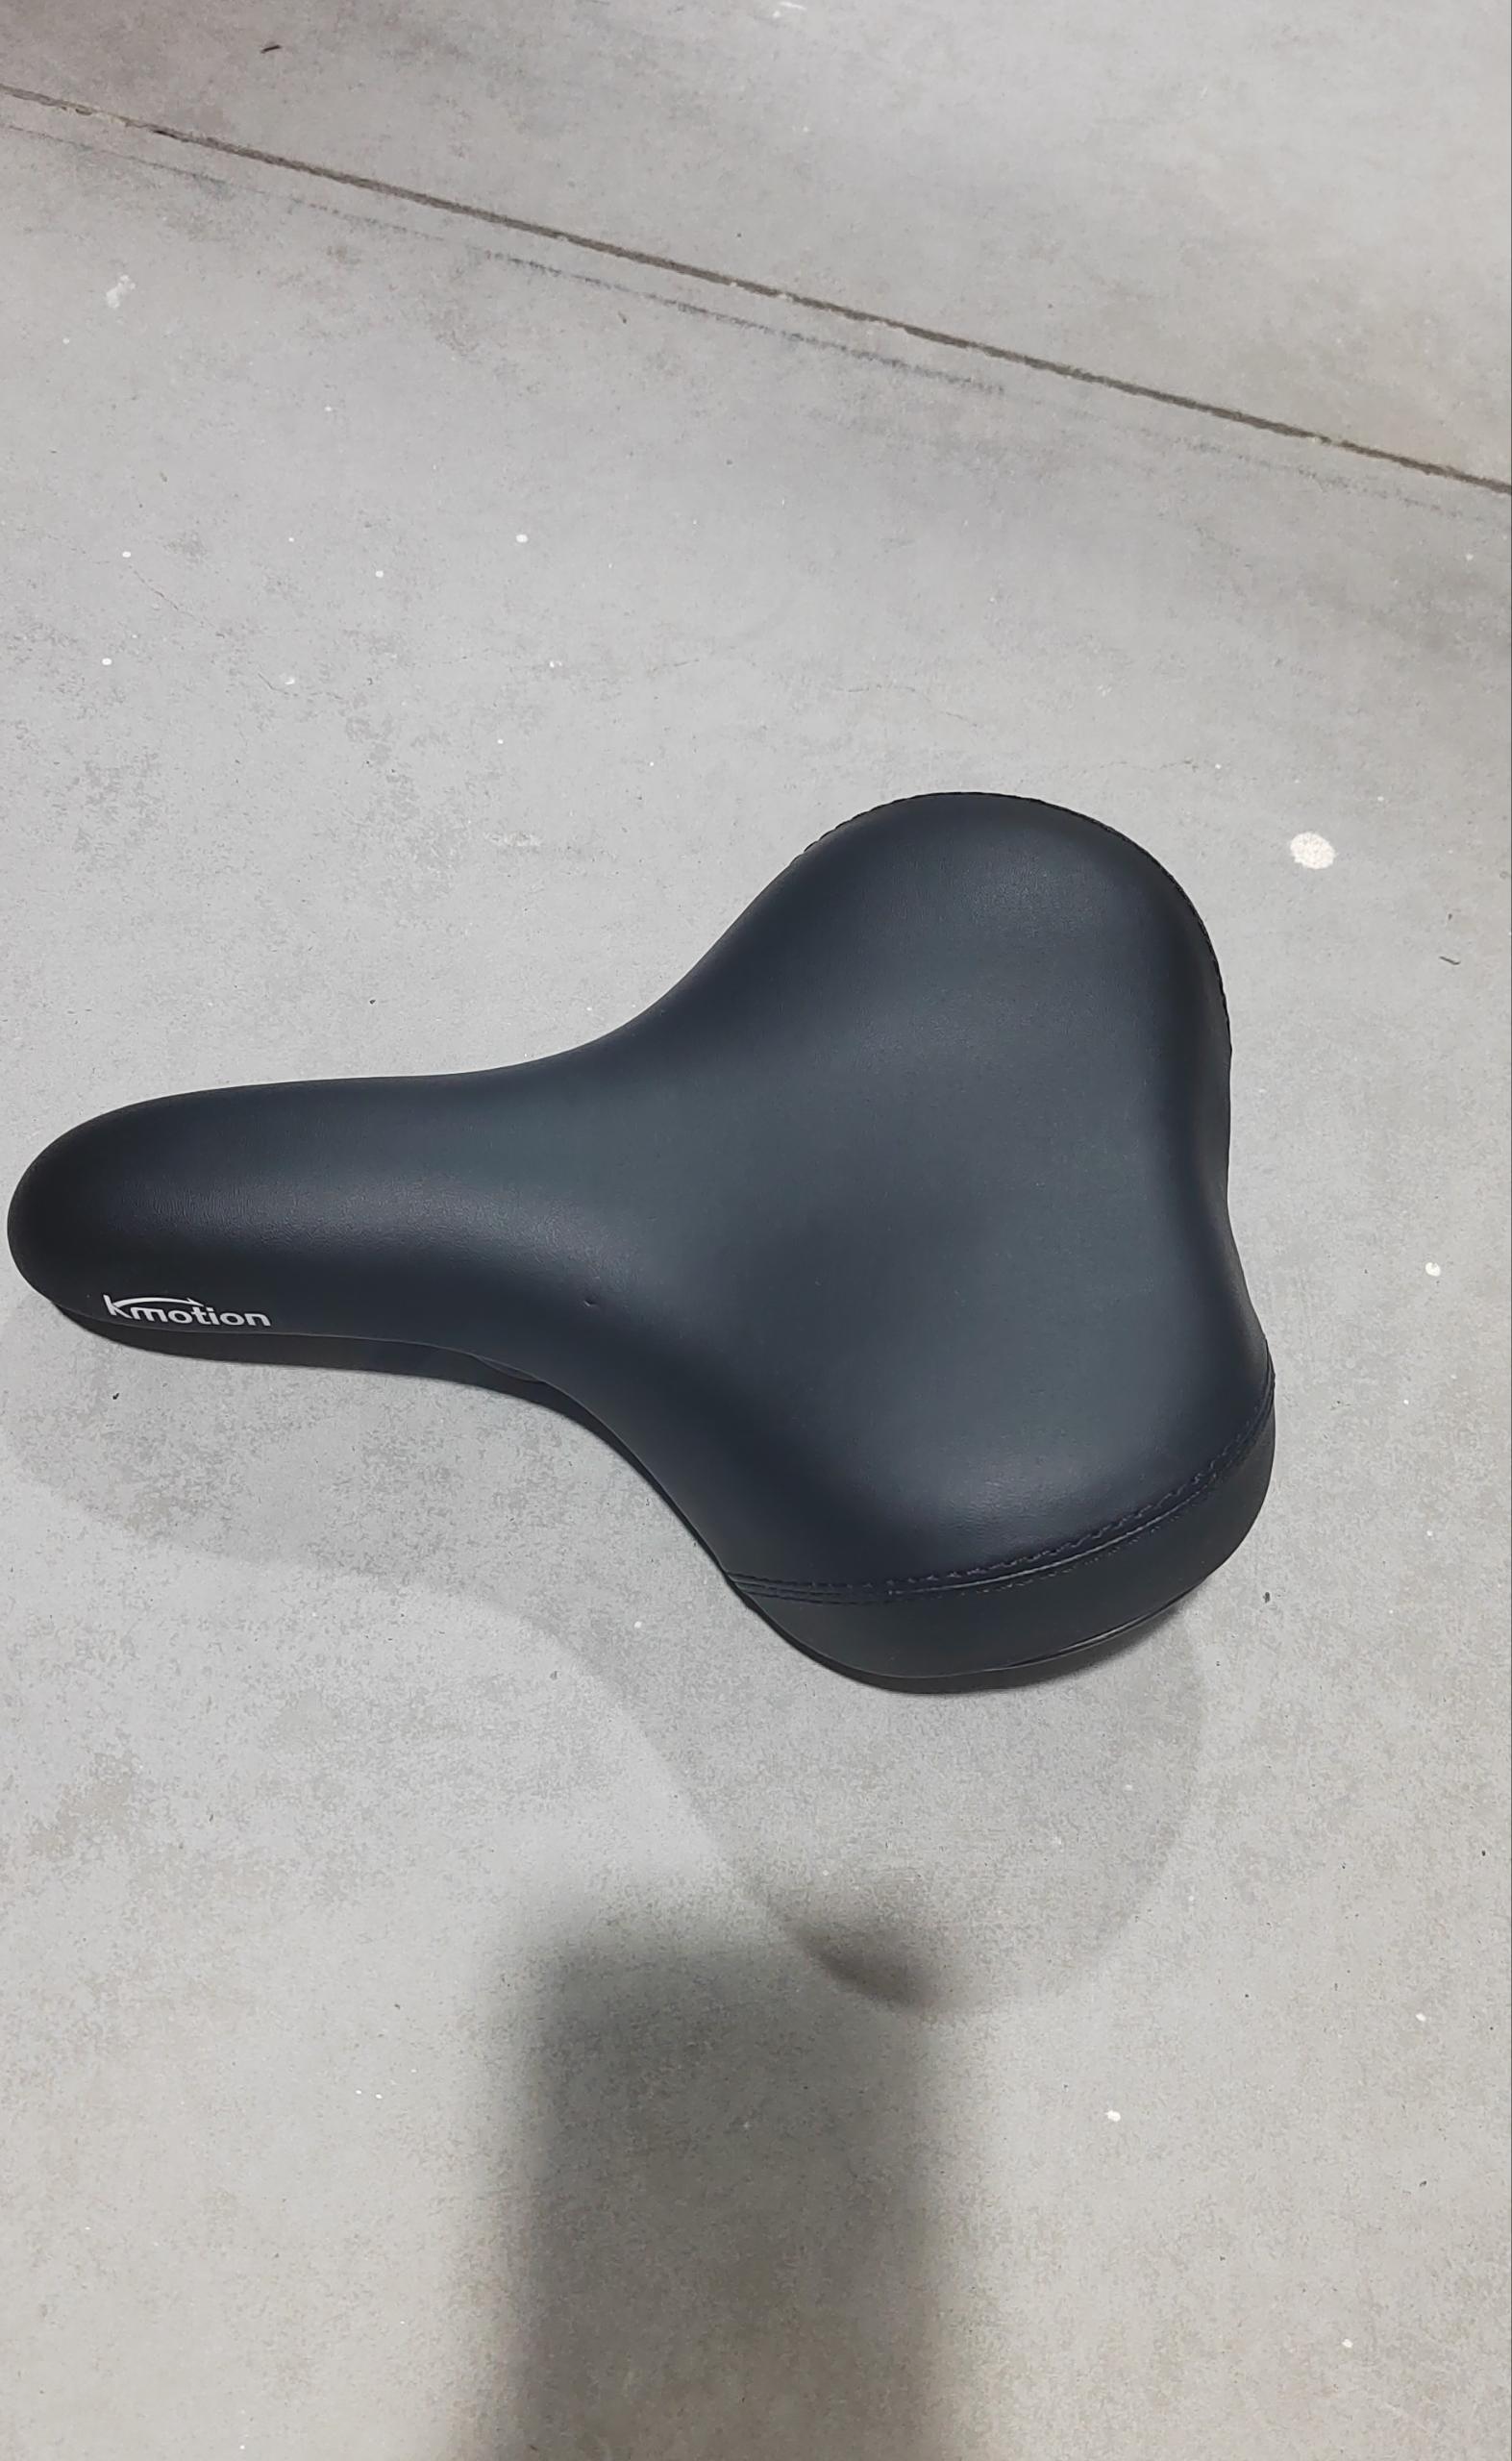 The seat surface is made of microfiber leather, offering softness, elasticity, wear-resistance, and stain-resistance, with a sofa-like feel that absorbs vibrations. Its ergonomic design, narrow in the front and rounded on the sides, ensures unimpeded pedaling, perfect for long-distance e-bike riding. The grooved design enhances air circulation and heat dissipation, while the round protrusions at the back provide soft support for increased comfort. Priced at $49.99.